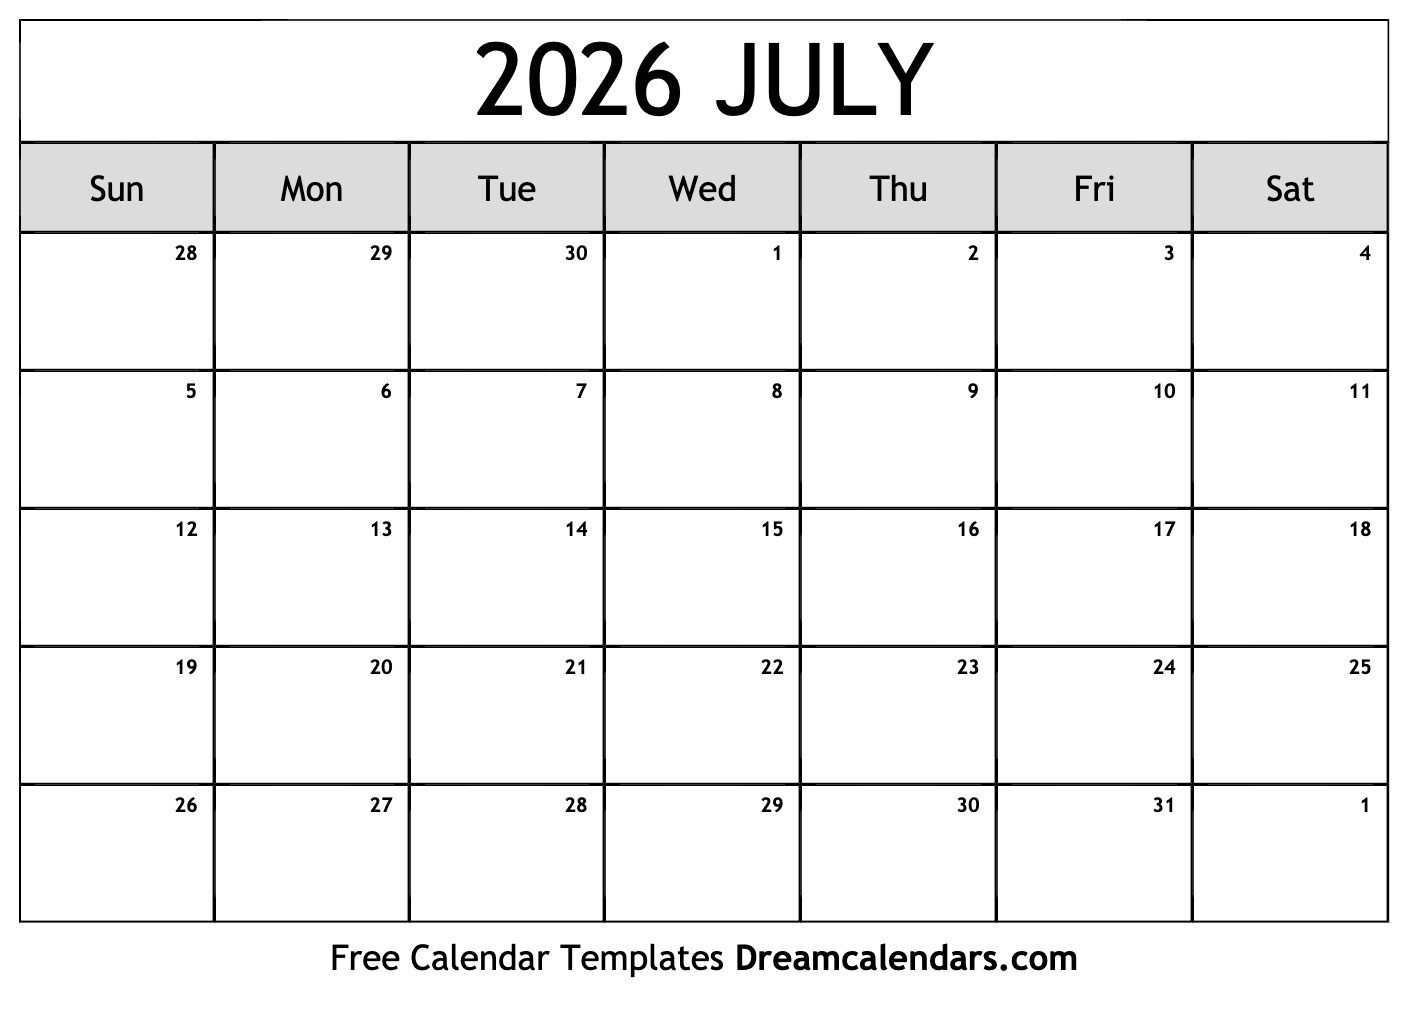 July 2026 Calendar - Free Printable With Holidays And Observances in Calendar For July 2026